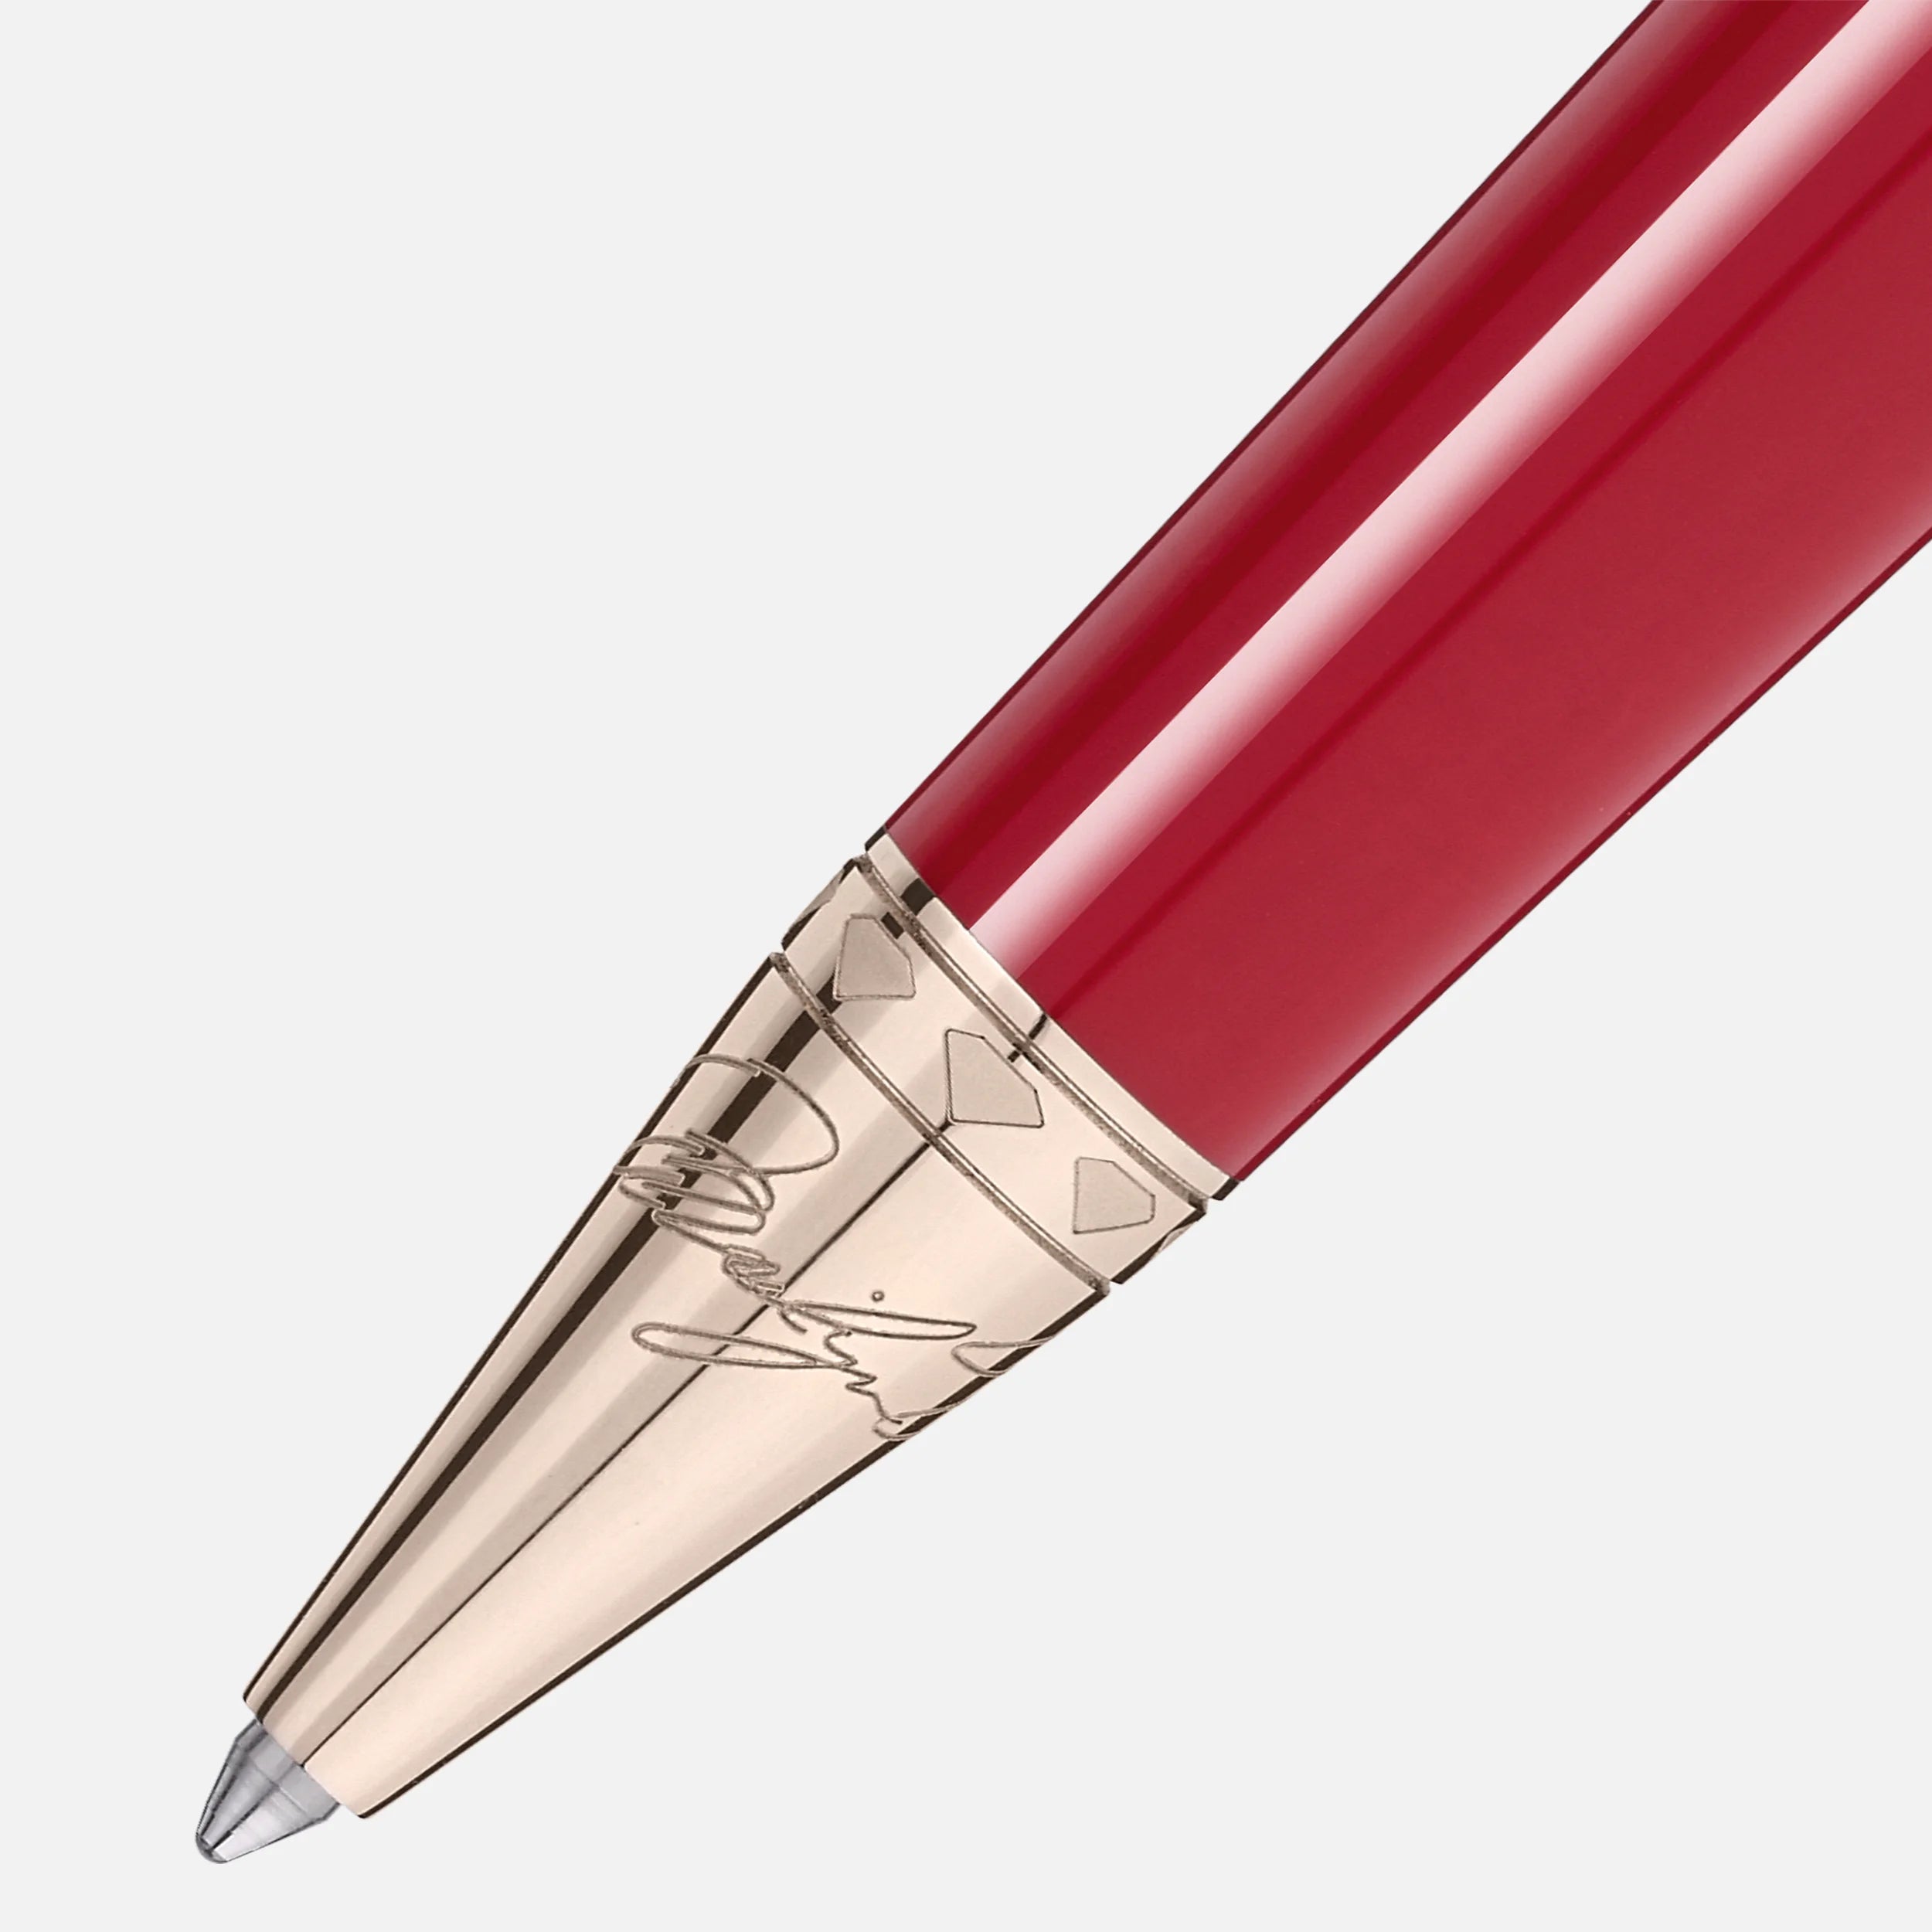 MONTBLANC | Penna a sfera Muses Marilyn Monroe Edizione Speciale | MB116068